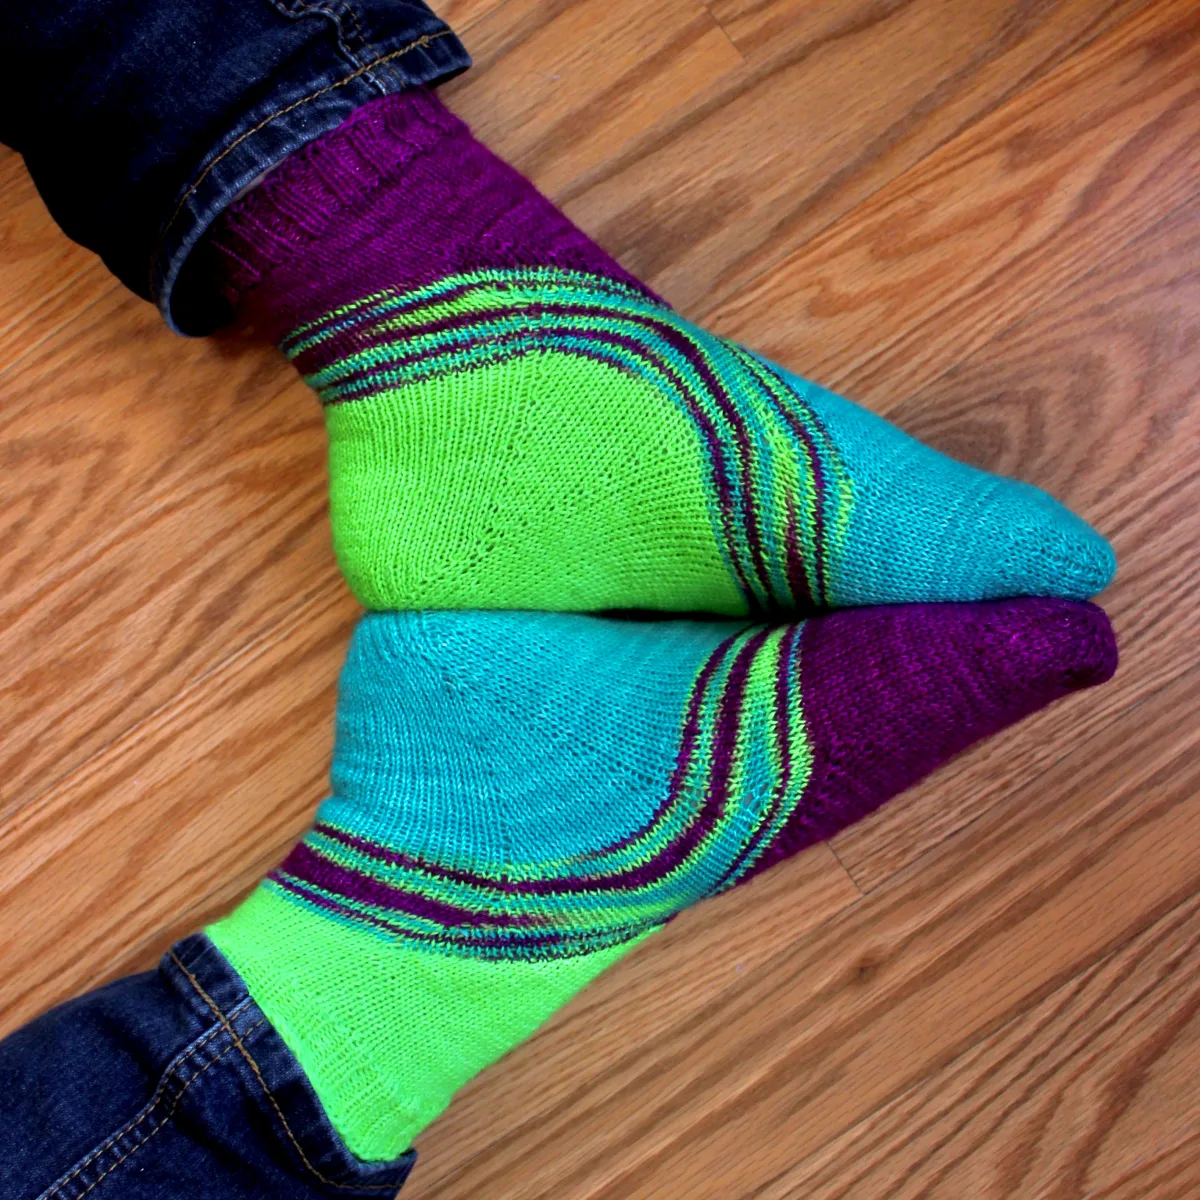 Feet lying sole-to-sole wearing bright green, blue, and purple socks with a multicoloured stripe between the colours.